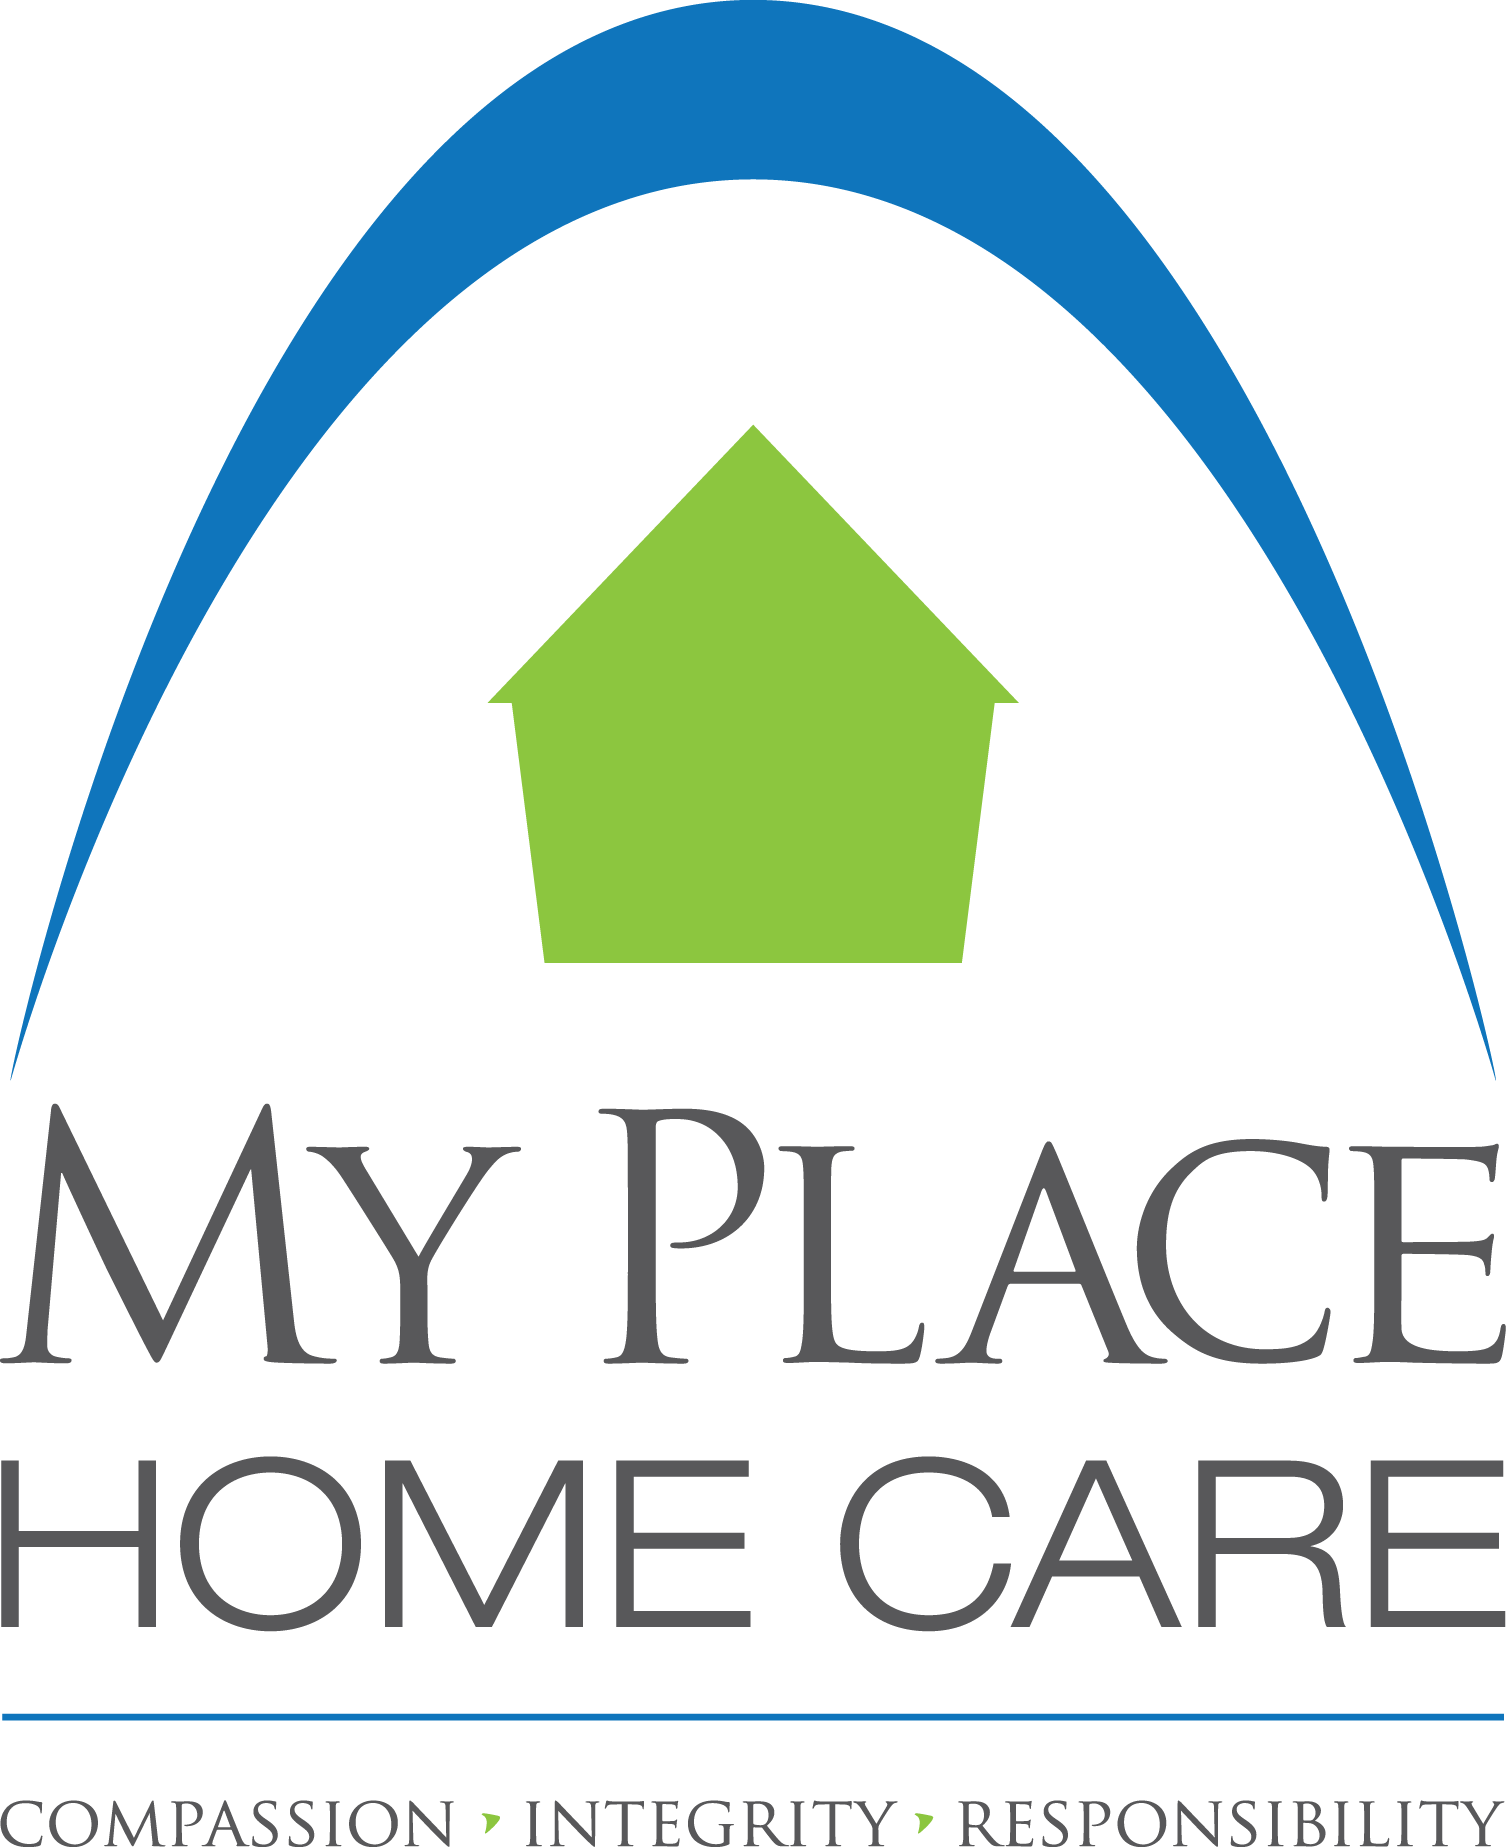 My Place Home Care